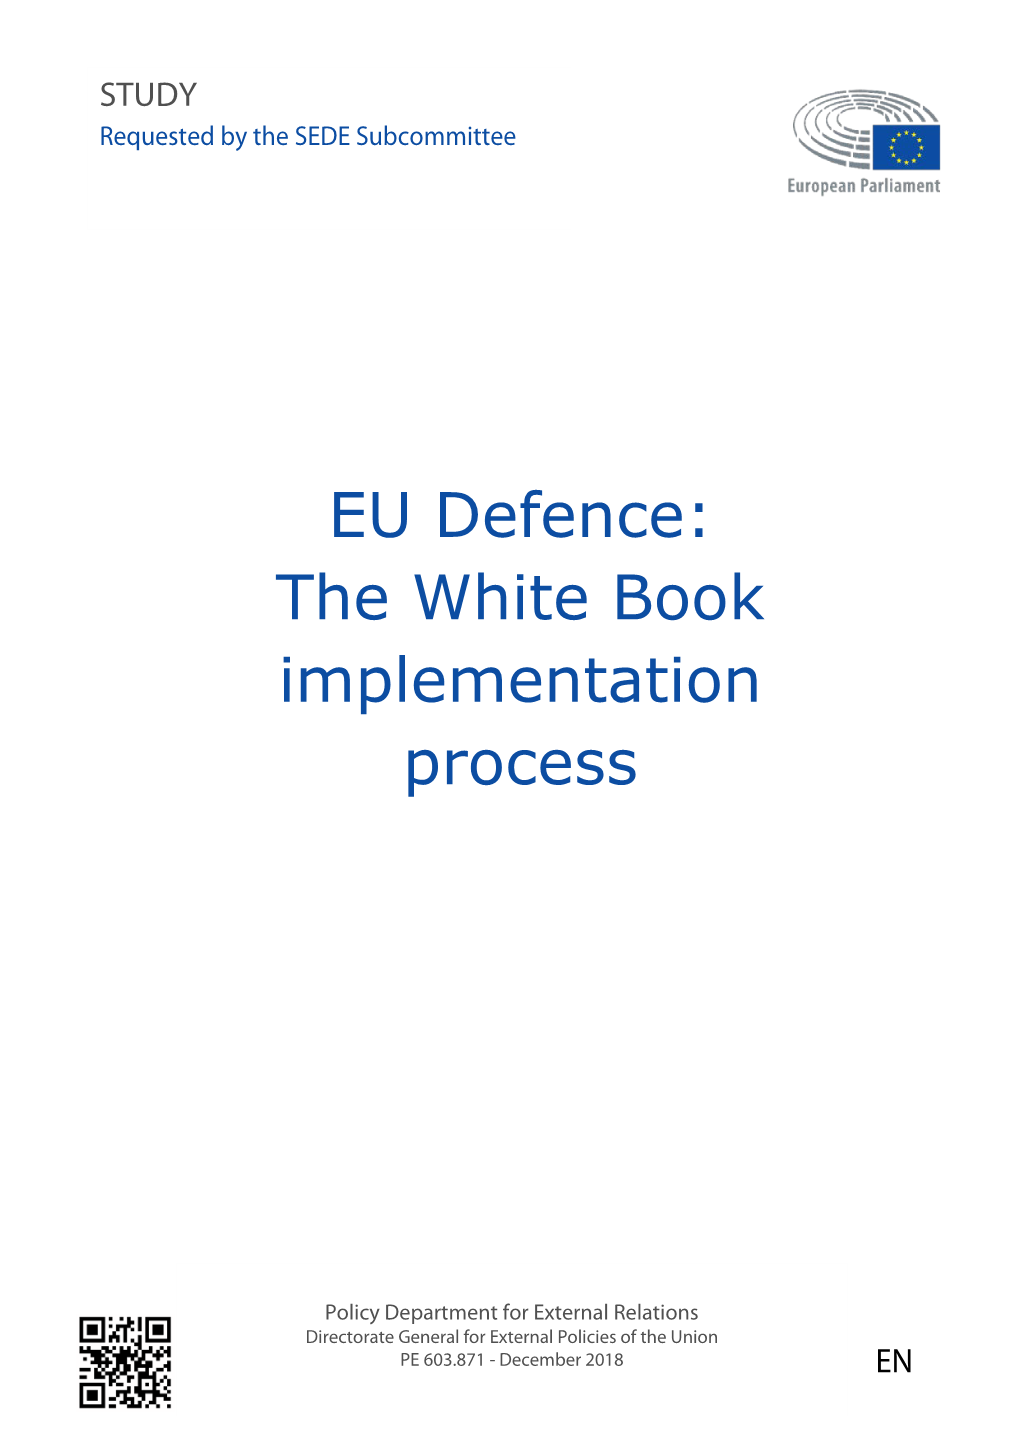 EU Defence: the White Book Implementation Process